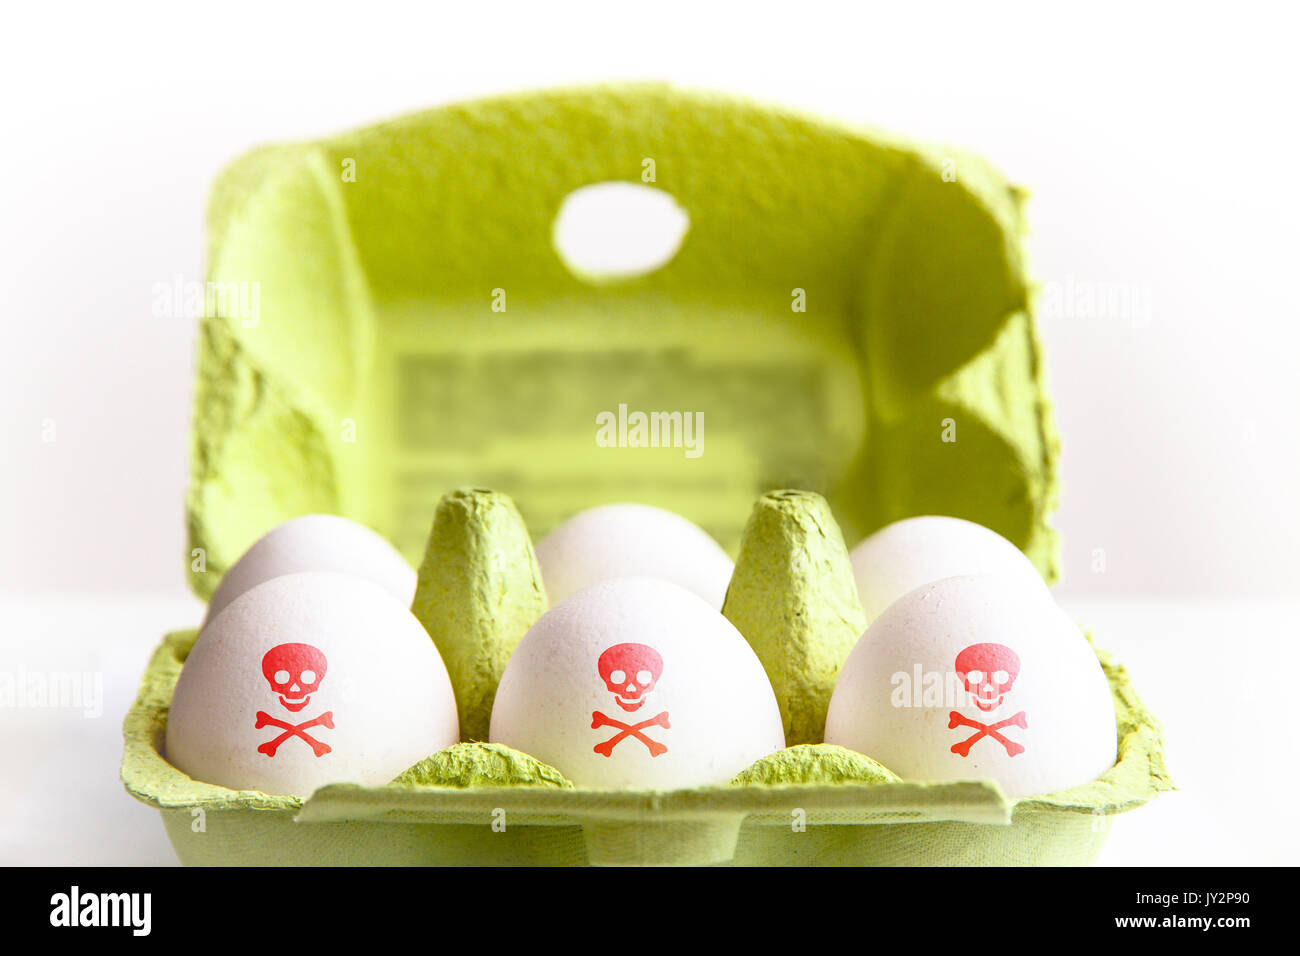 Eggs in a green paper package with the eggs painted with a red poisonous risk symbol skull and bones. Concept for food contamination egg scandal. Stock Photo